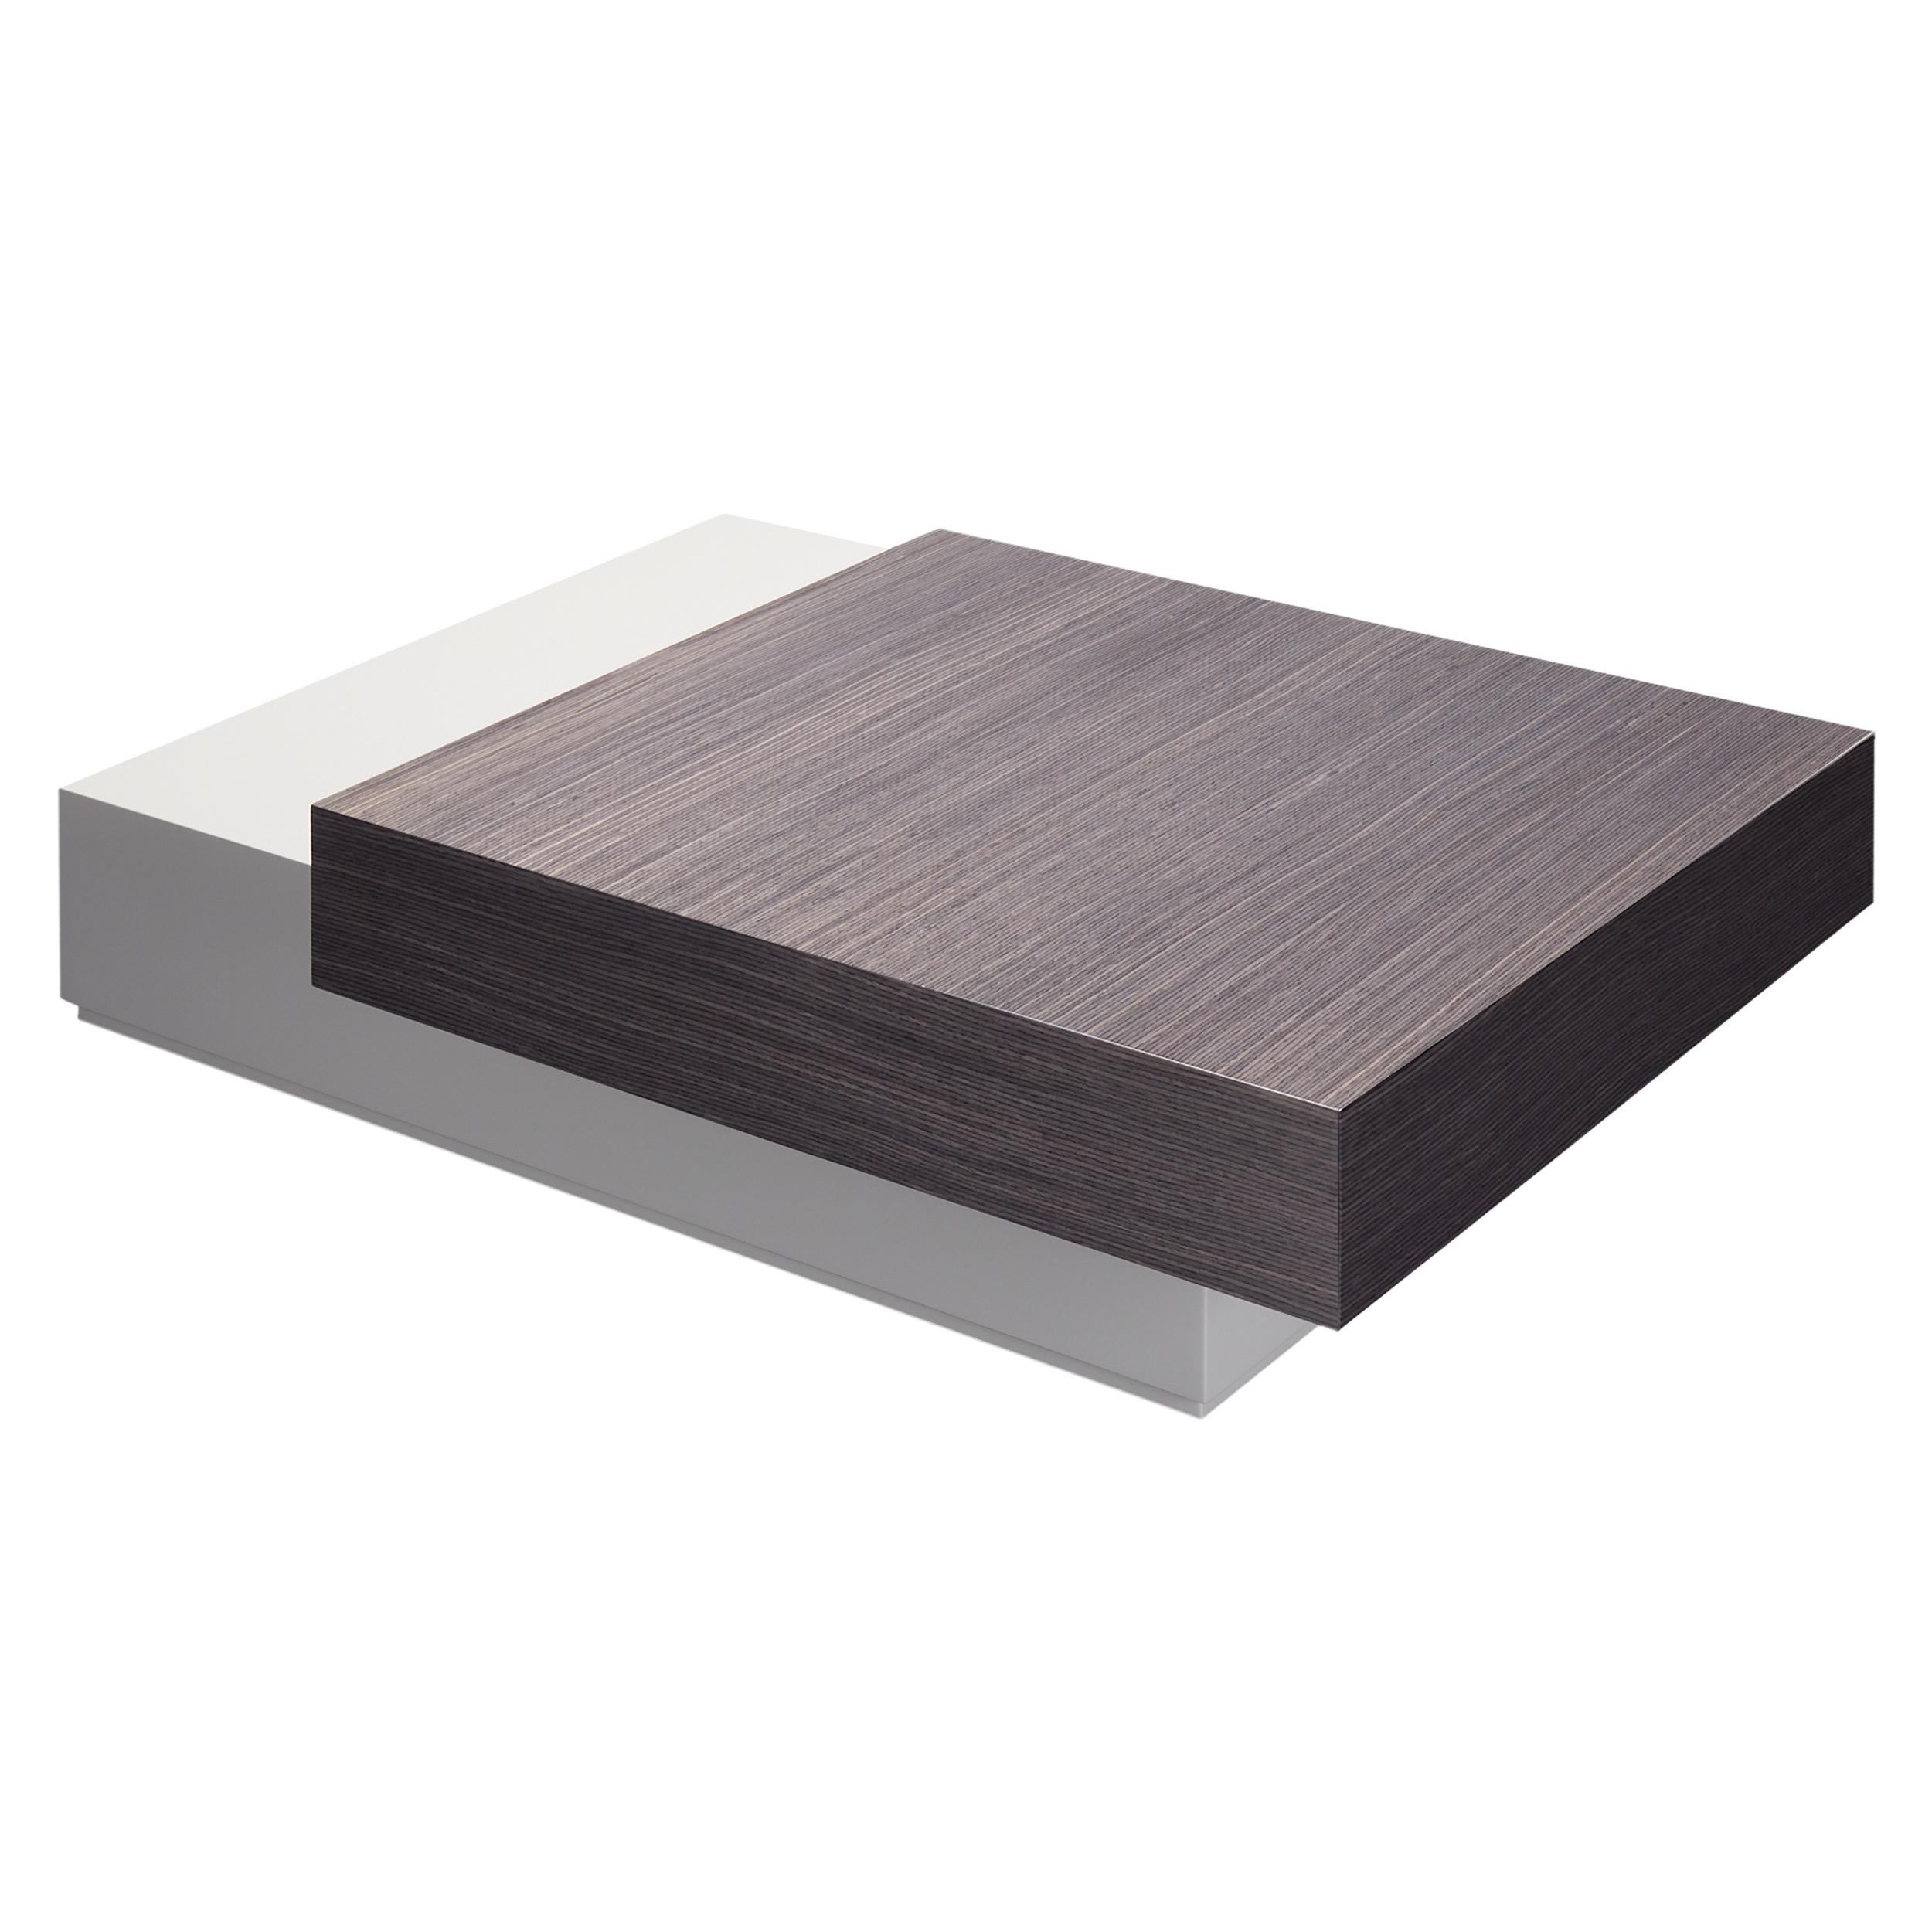 Dickens coffee table, with two overlapping drawers, is made of lacquered and veneered wood, but allows multiple combinations of finishes to suit any design needs.‎

Shown in glossy Grisio Gris top drawer, combined with glossy lacquered bottom drawer